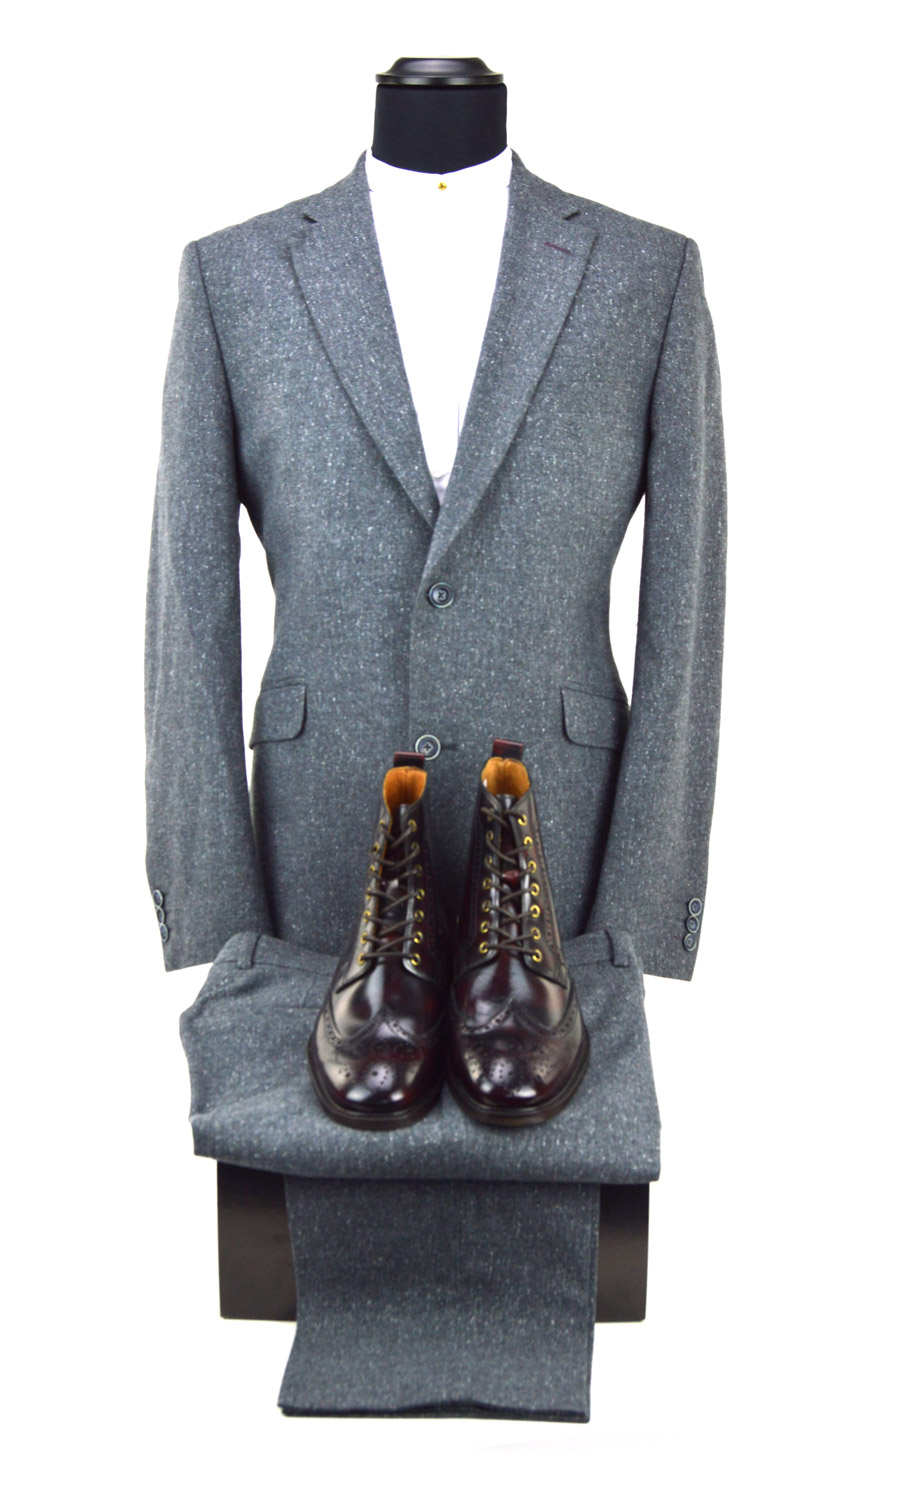 boots to wear with suits